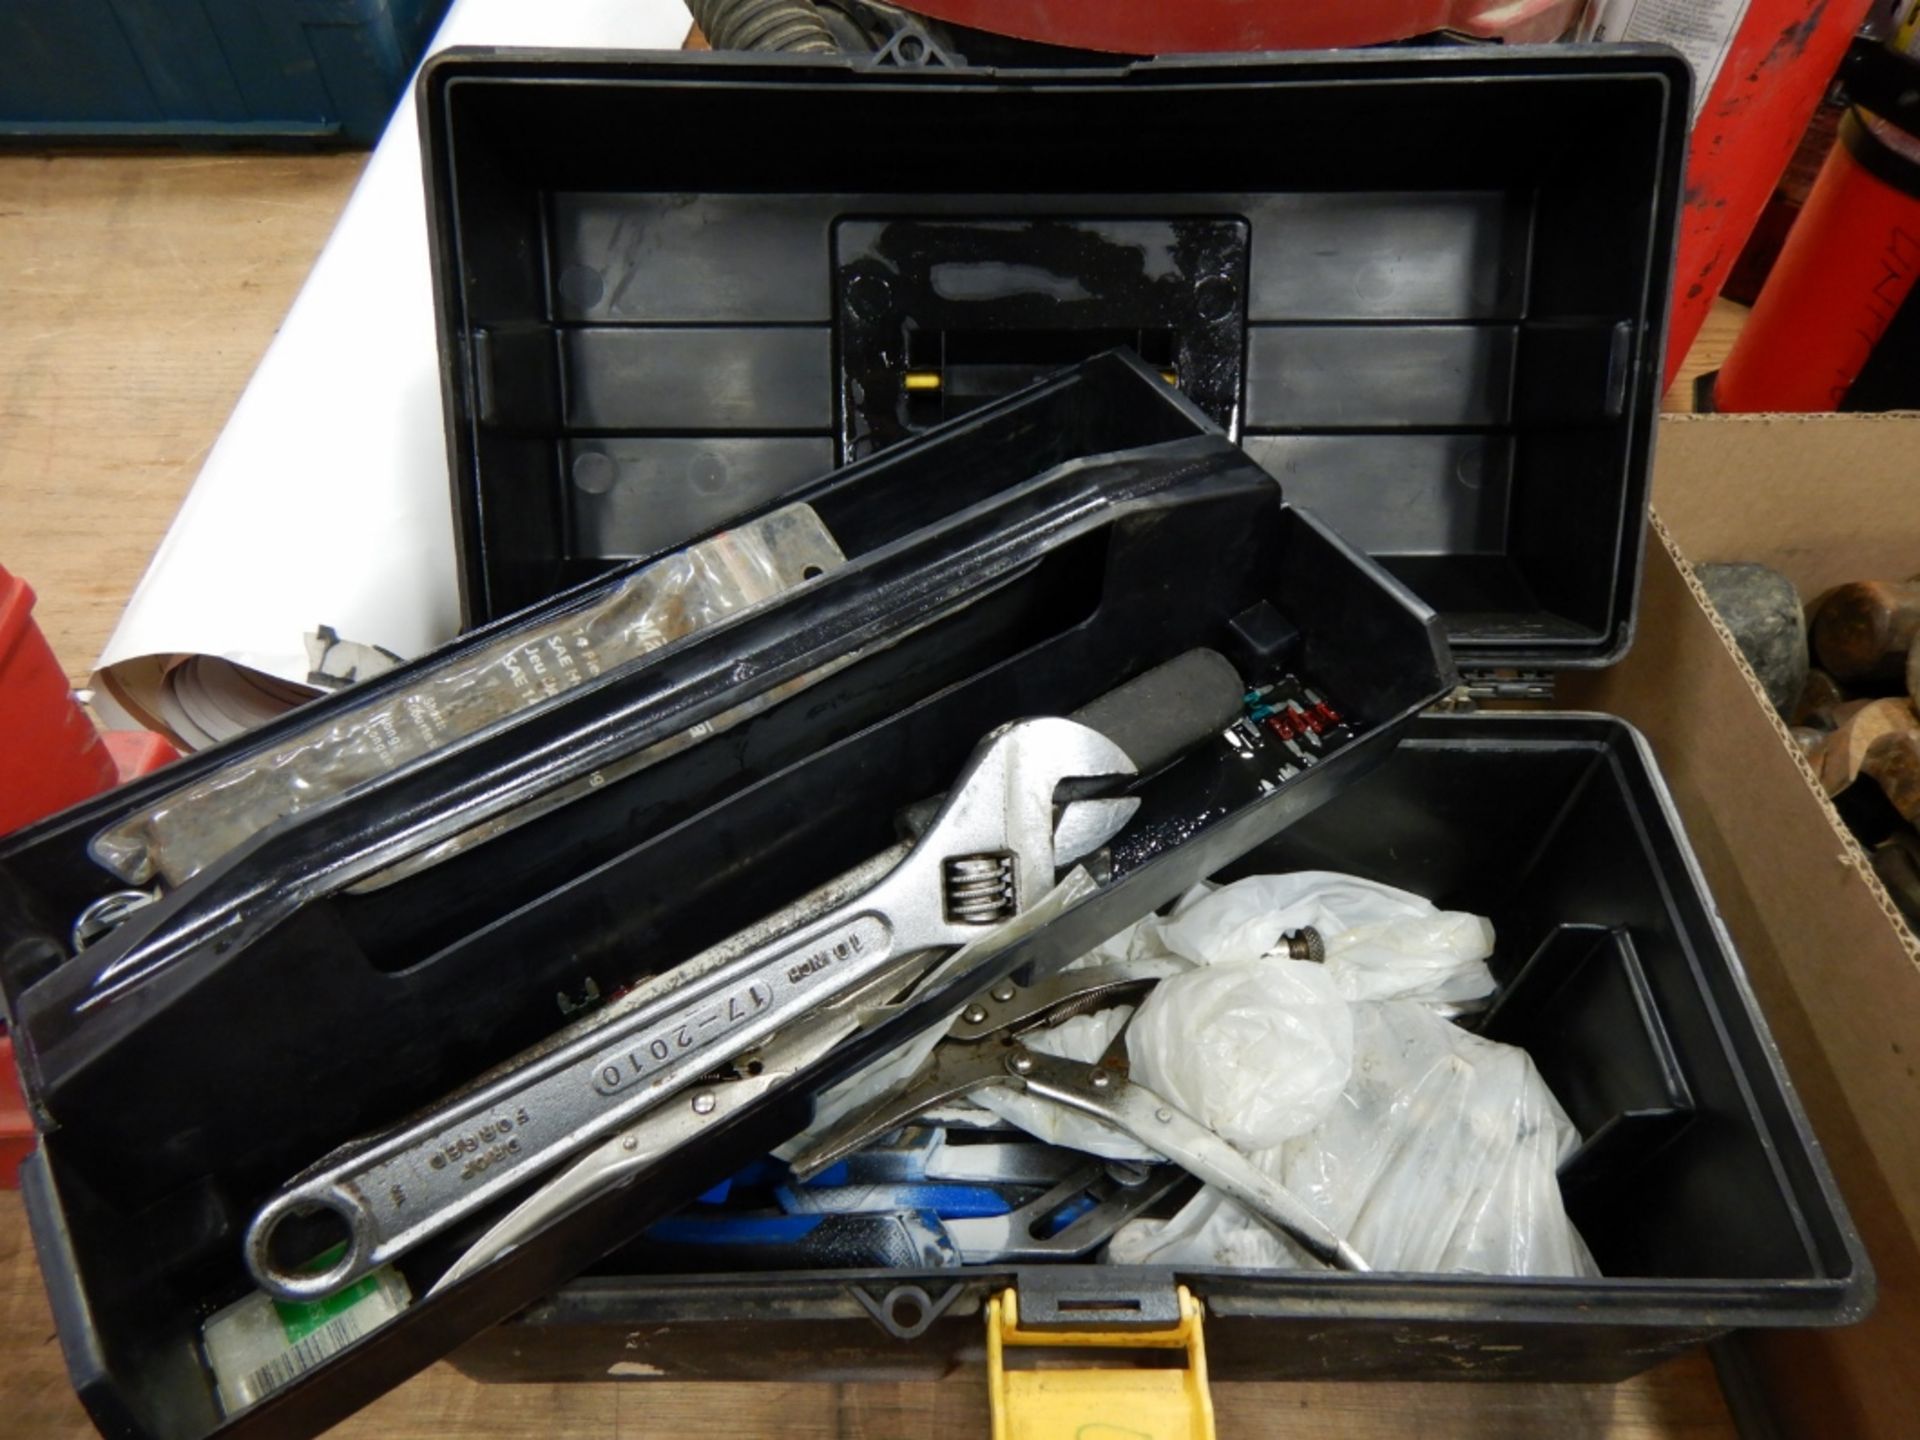 MASTERCRAFT STEEL AND 2-POLY TOOLBOXES W/ ASSORTED WRENCHES, PLIERS, HAND TOOLS, ETC. - Image 2 of 3